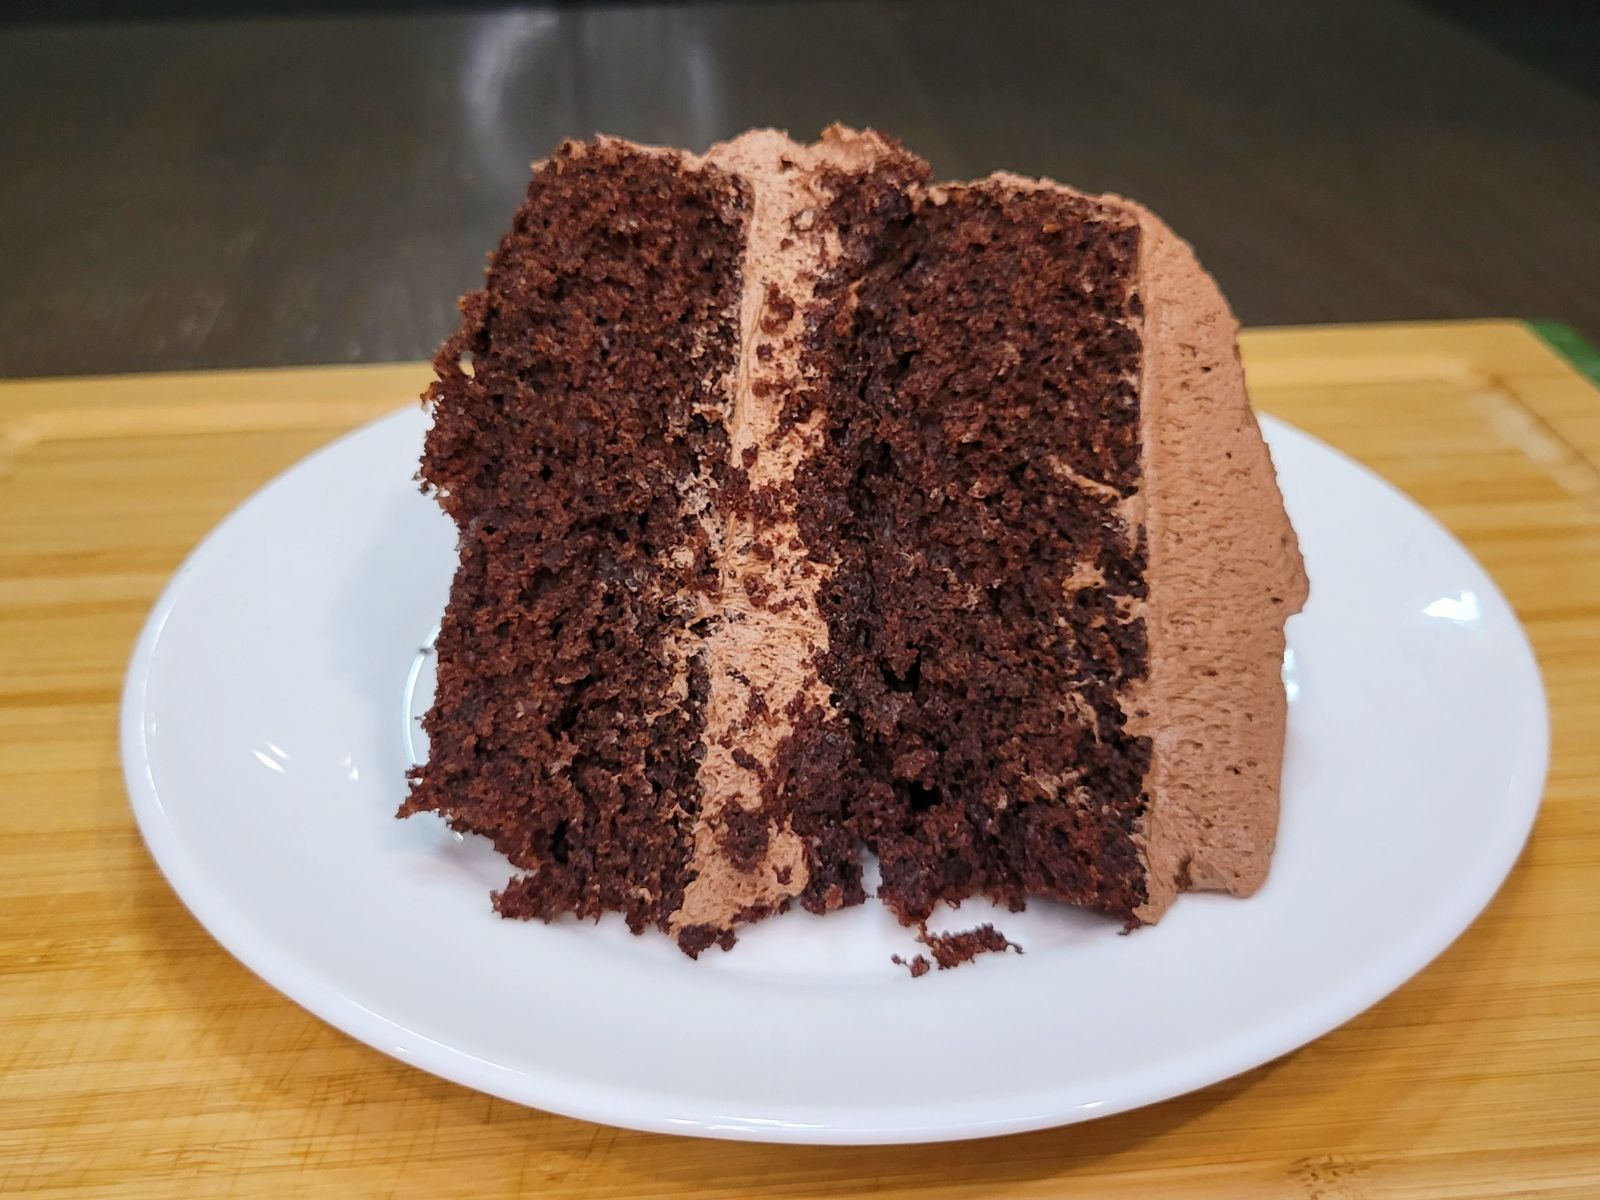 A slice of Chocolate Cake Made With Fresh Milled Flour iced with chocolate buttercream sitting on a white plate.